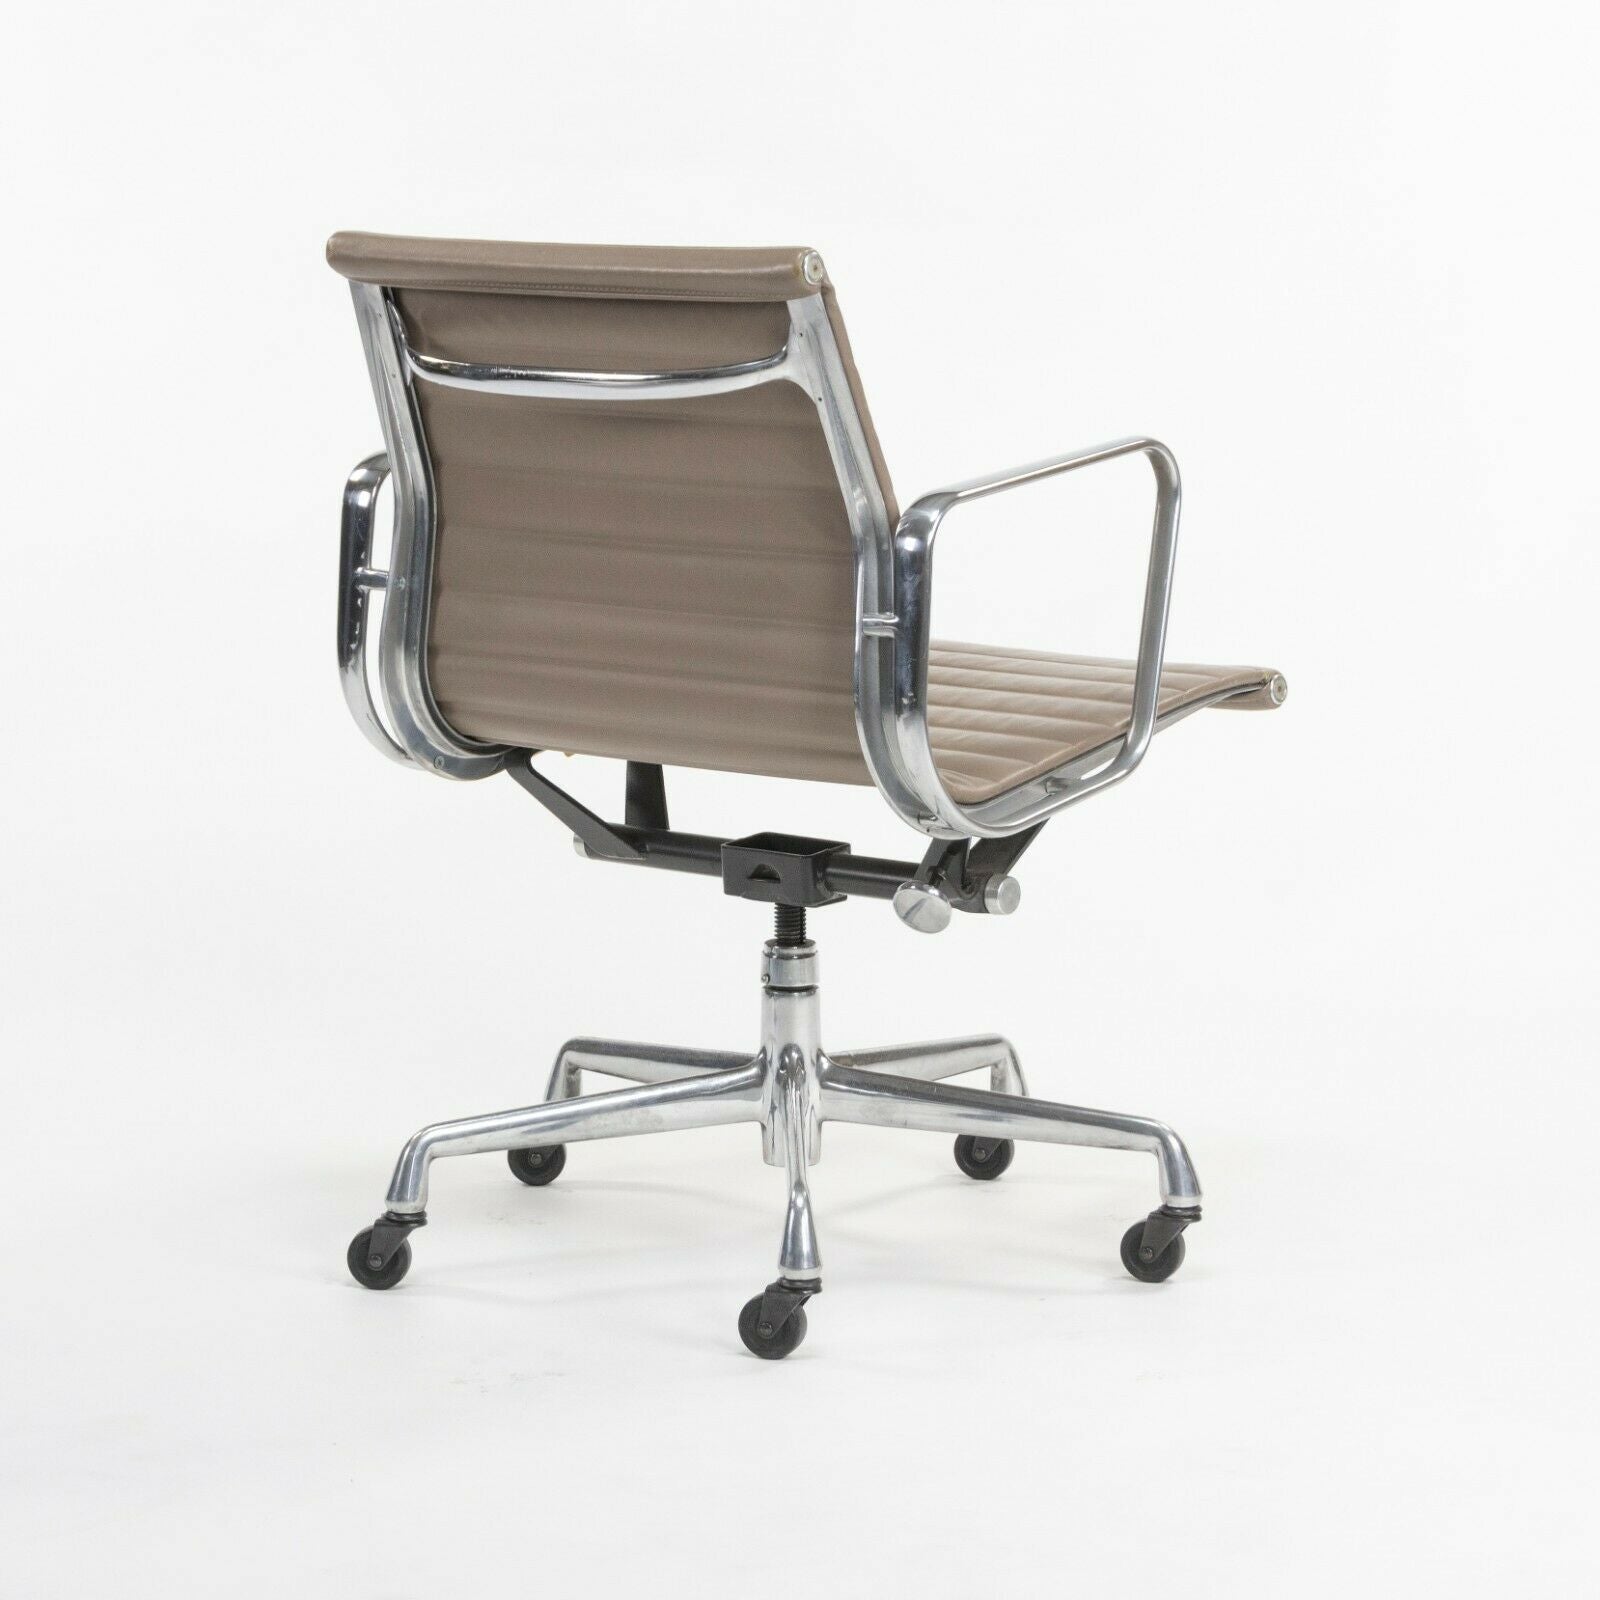 SOLD Greige Leather Herman Miller Eames Aluminum Group Management Desk Chair 8 Available